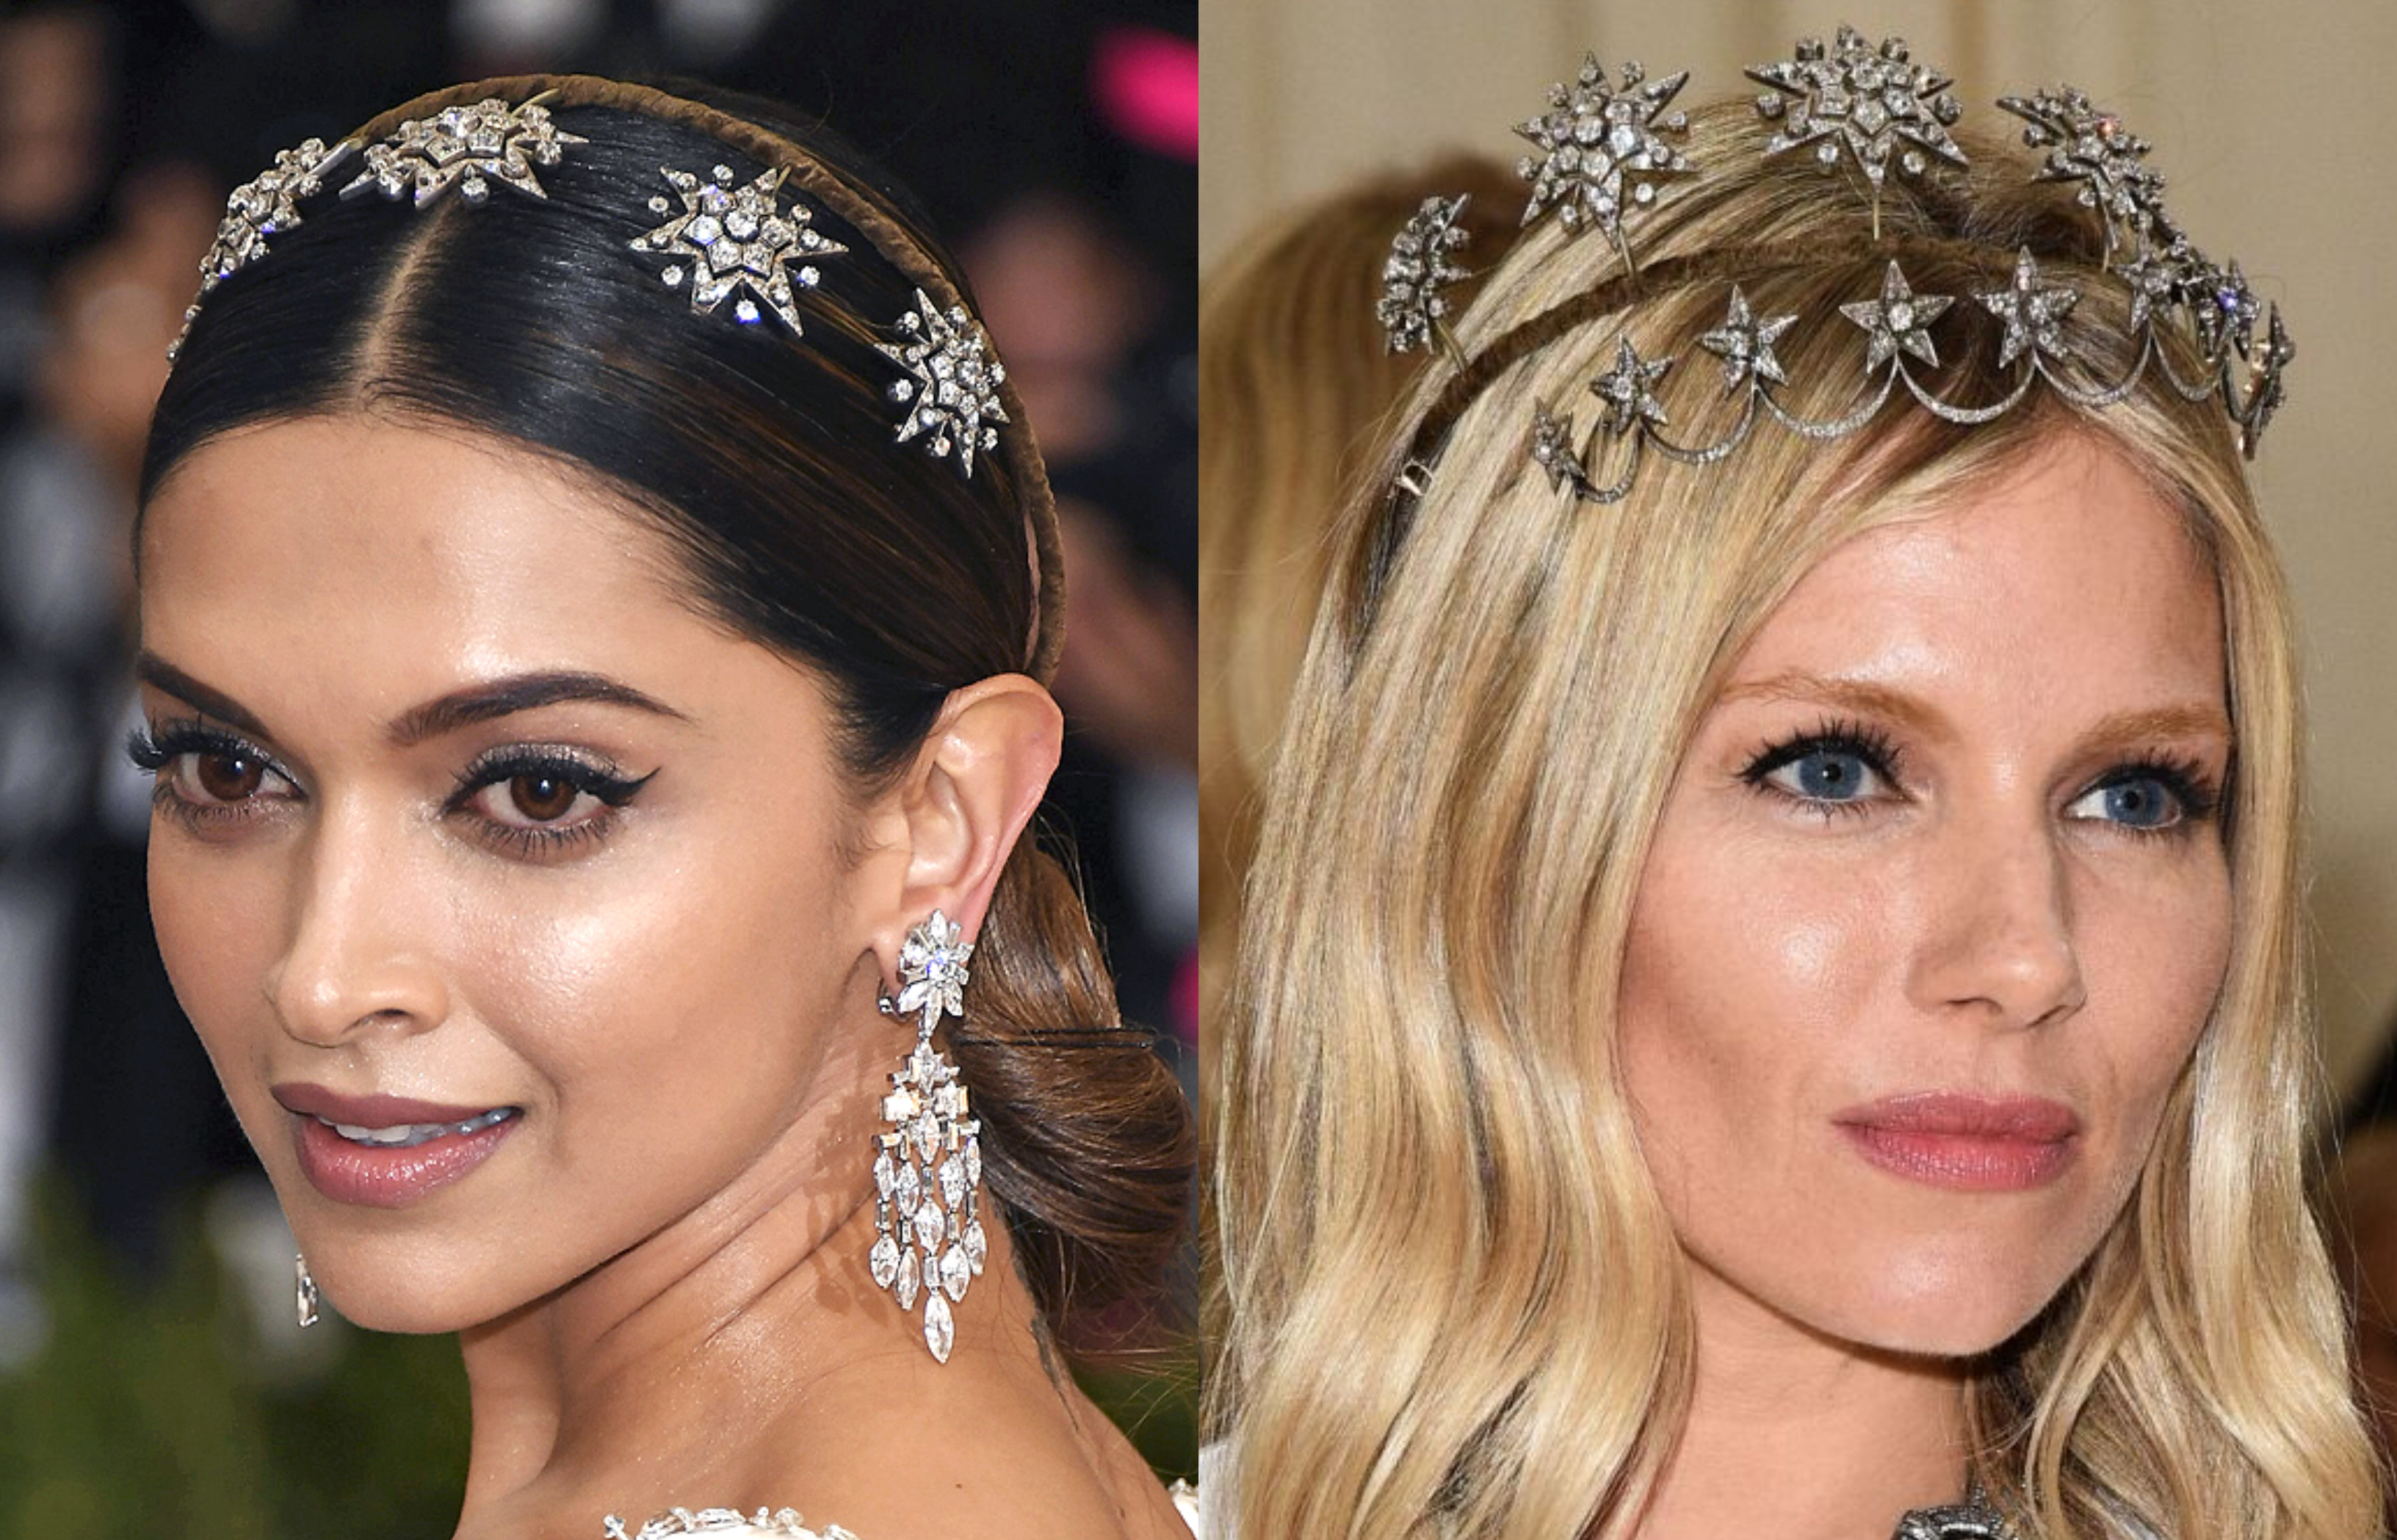 Tiara Mania on X: This marks at least the third time this tiara or parts  of it have been worn at the Met Gala. It was worn by Deepika Padukone in  2017